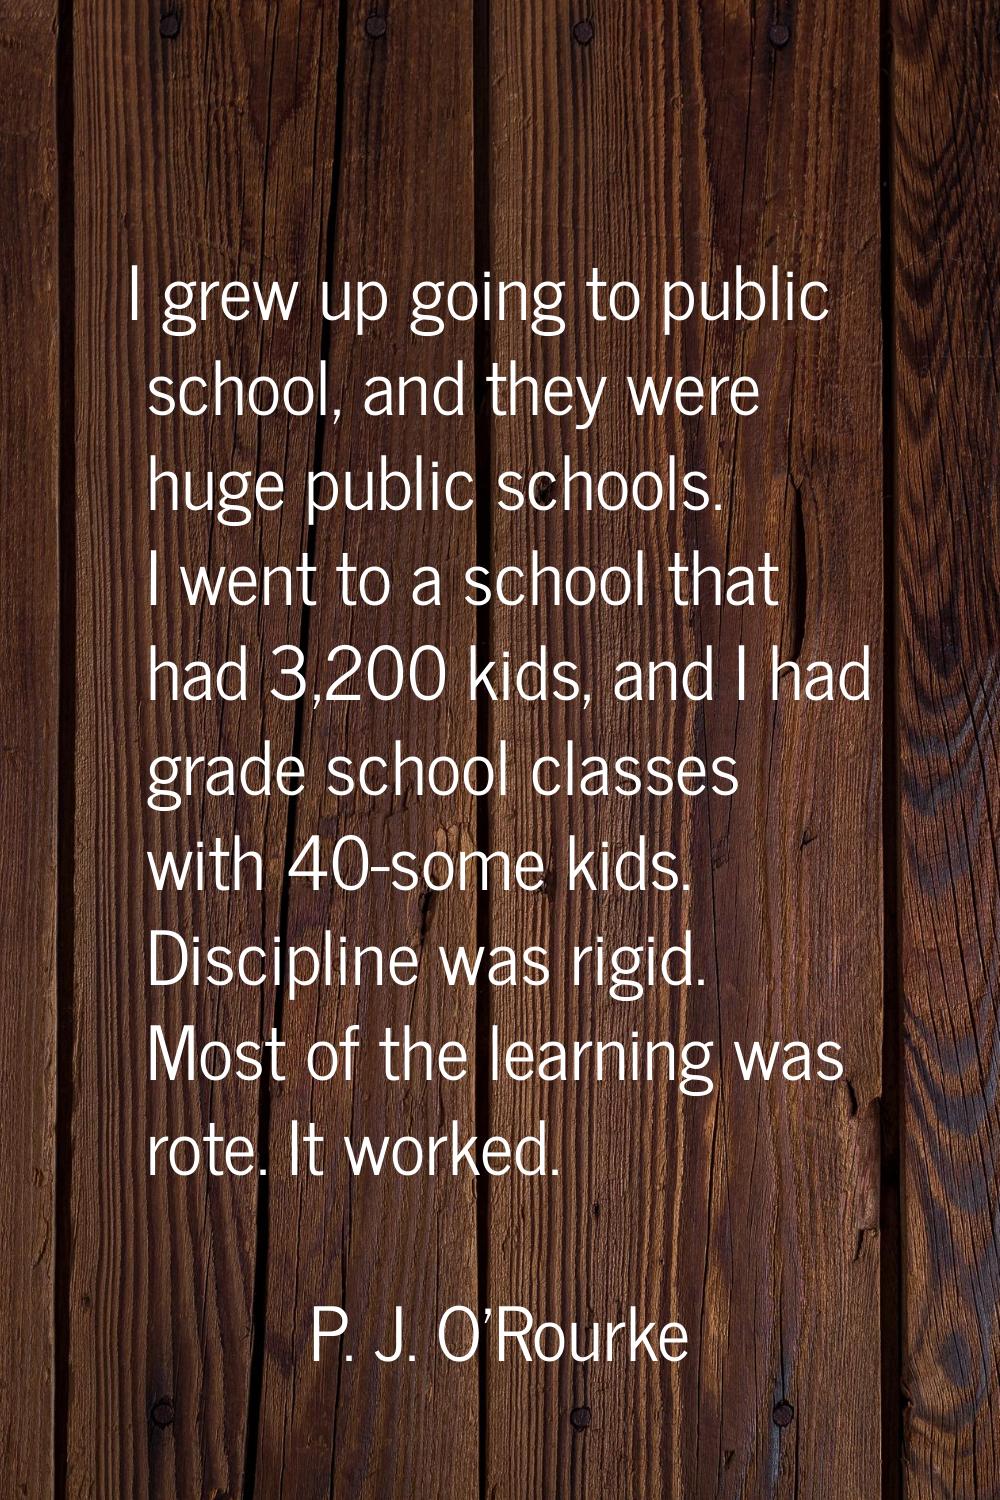 I grew up going to public school, and they were huge public schools. I went to a school that had 3,